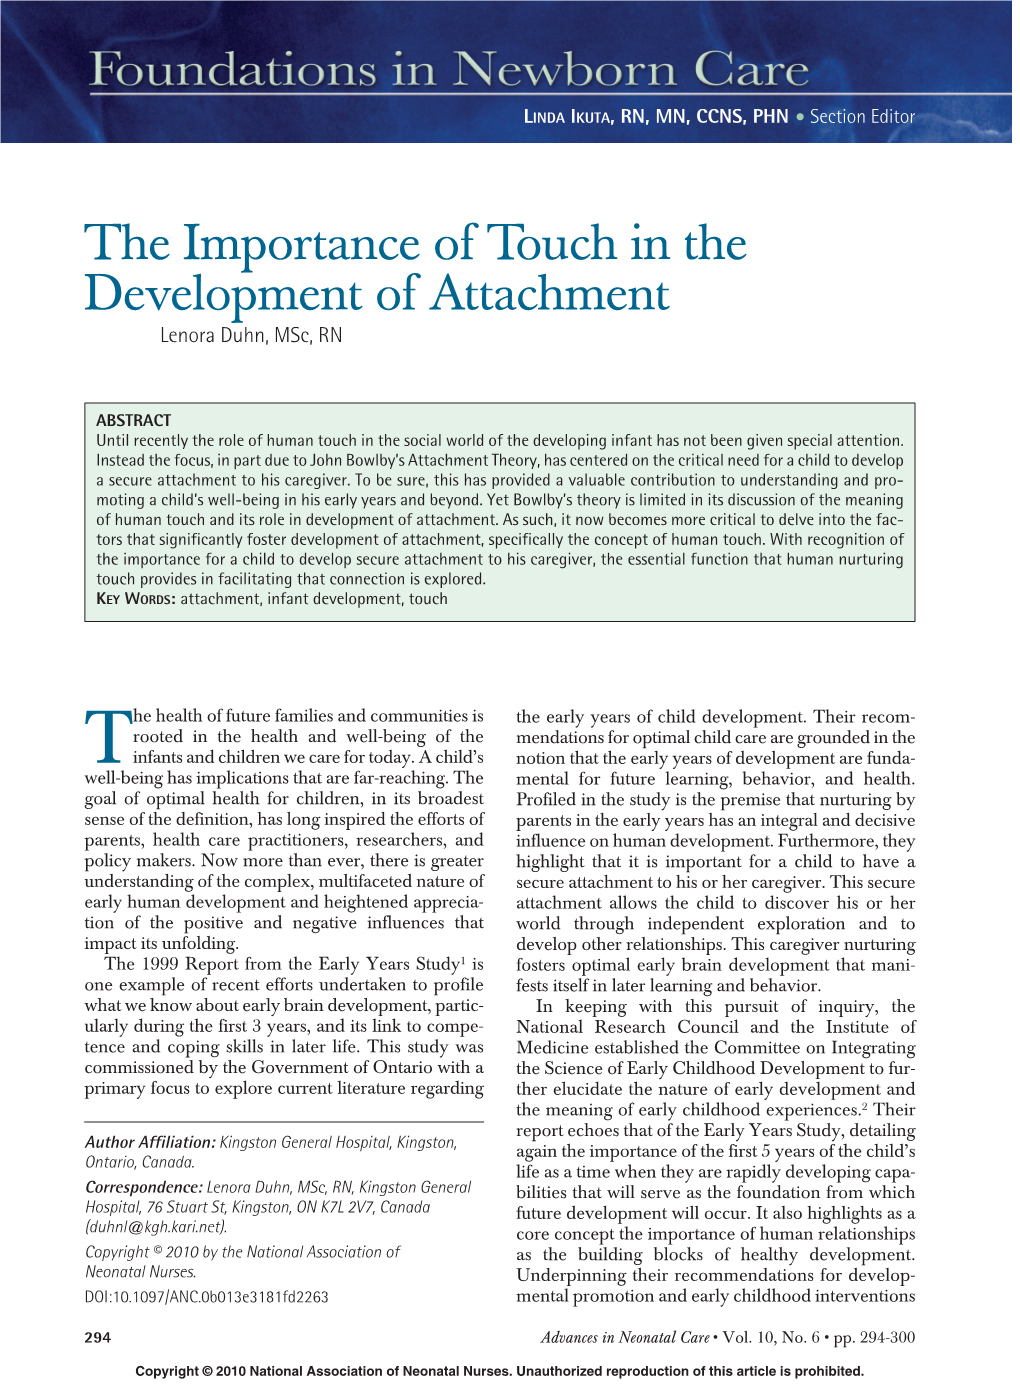 The Importance of Touch in the Development of Attachment Lenora Duhn, Msc, RN